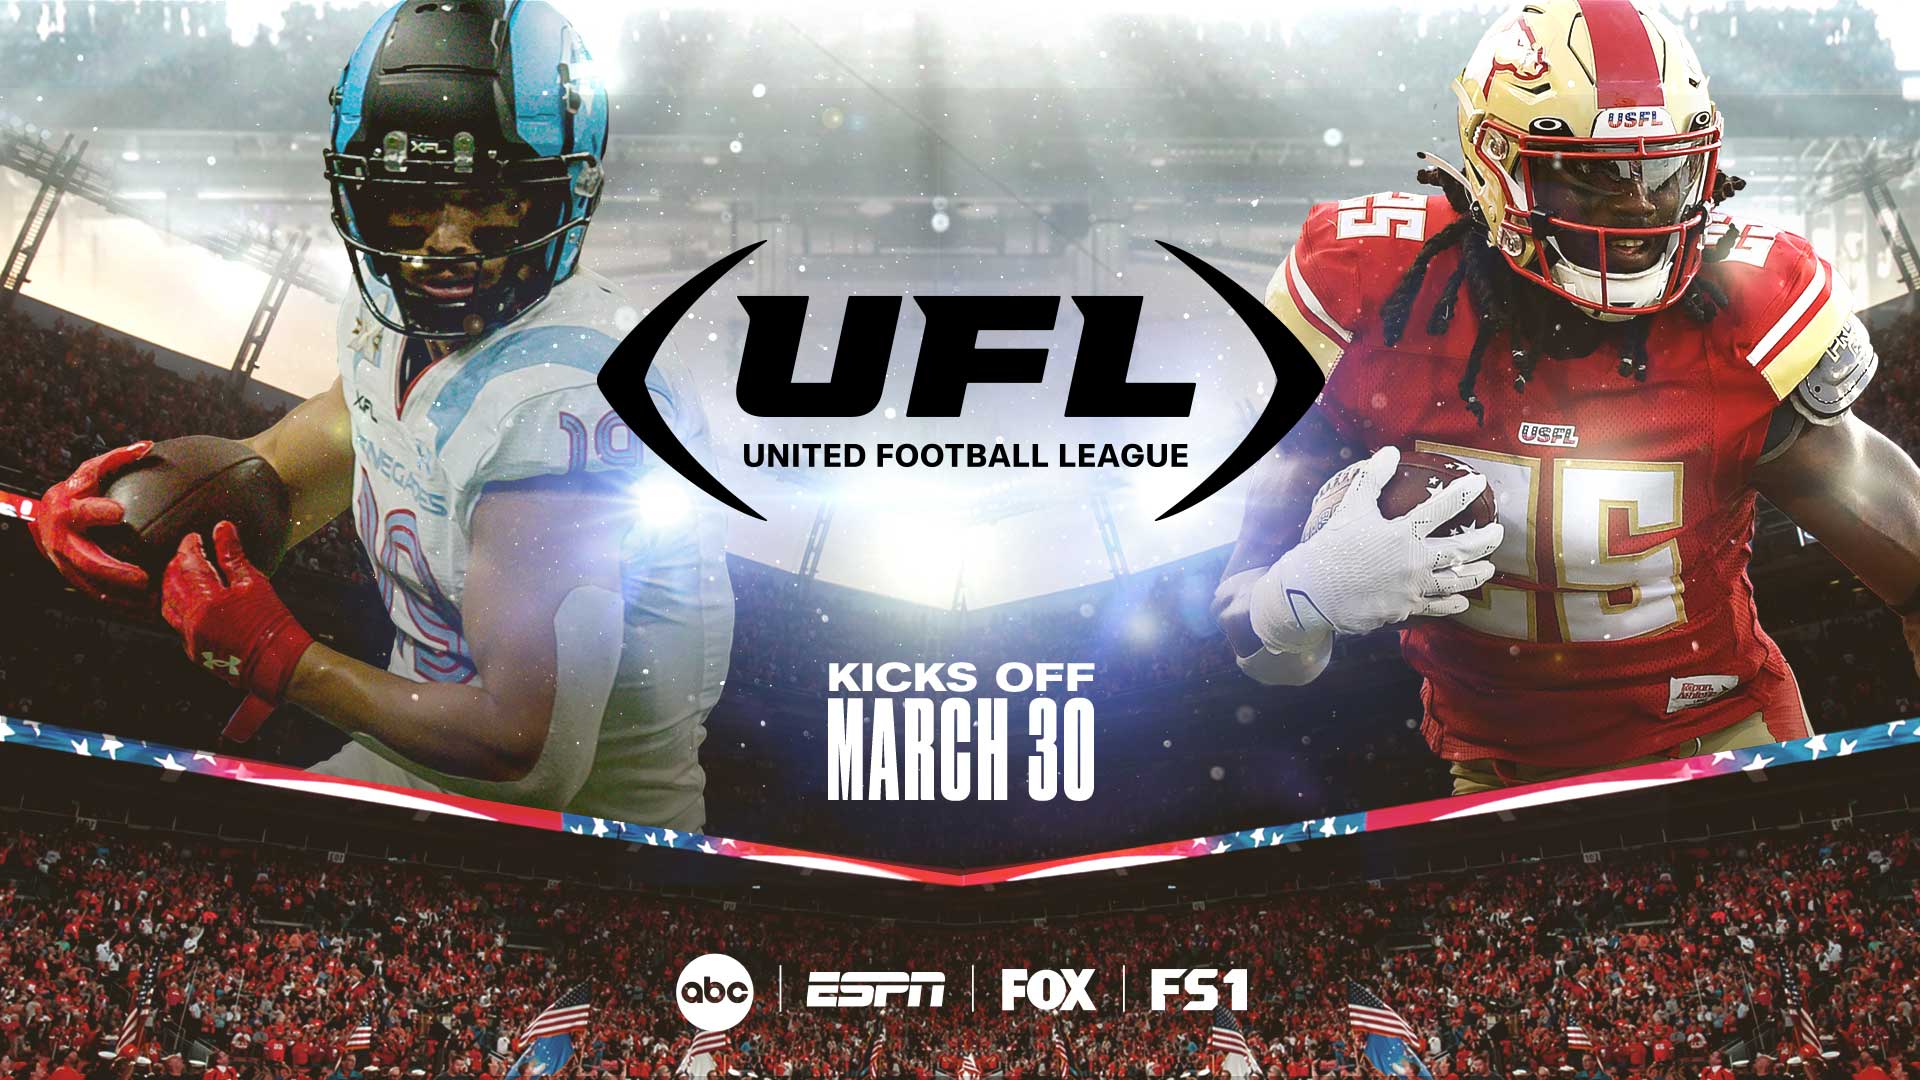 UNITED FOOTBALL LEAGUE (“UFL”) SET TO LAUNCH AS THE PREMIER SPRING